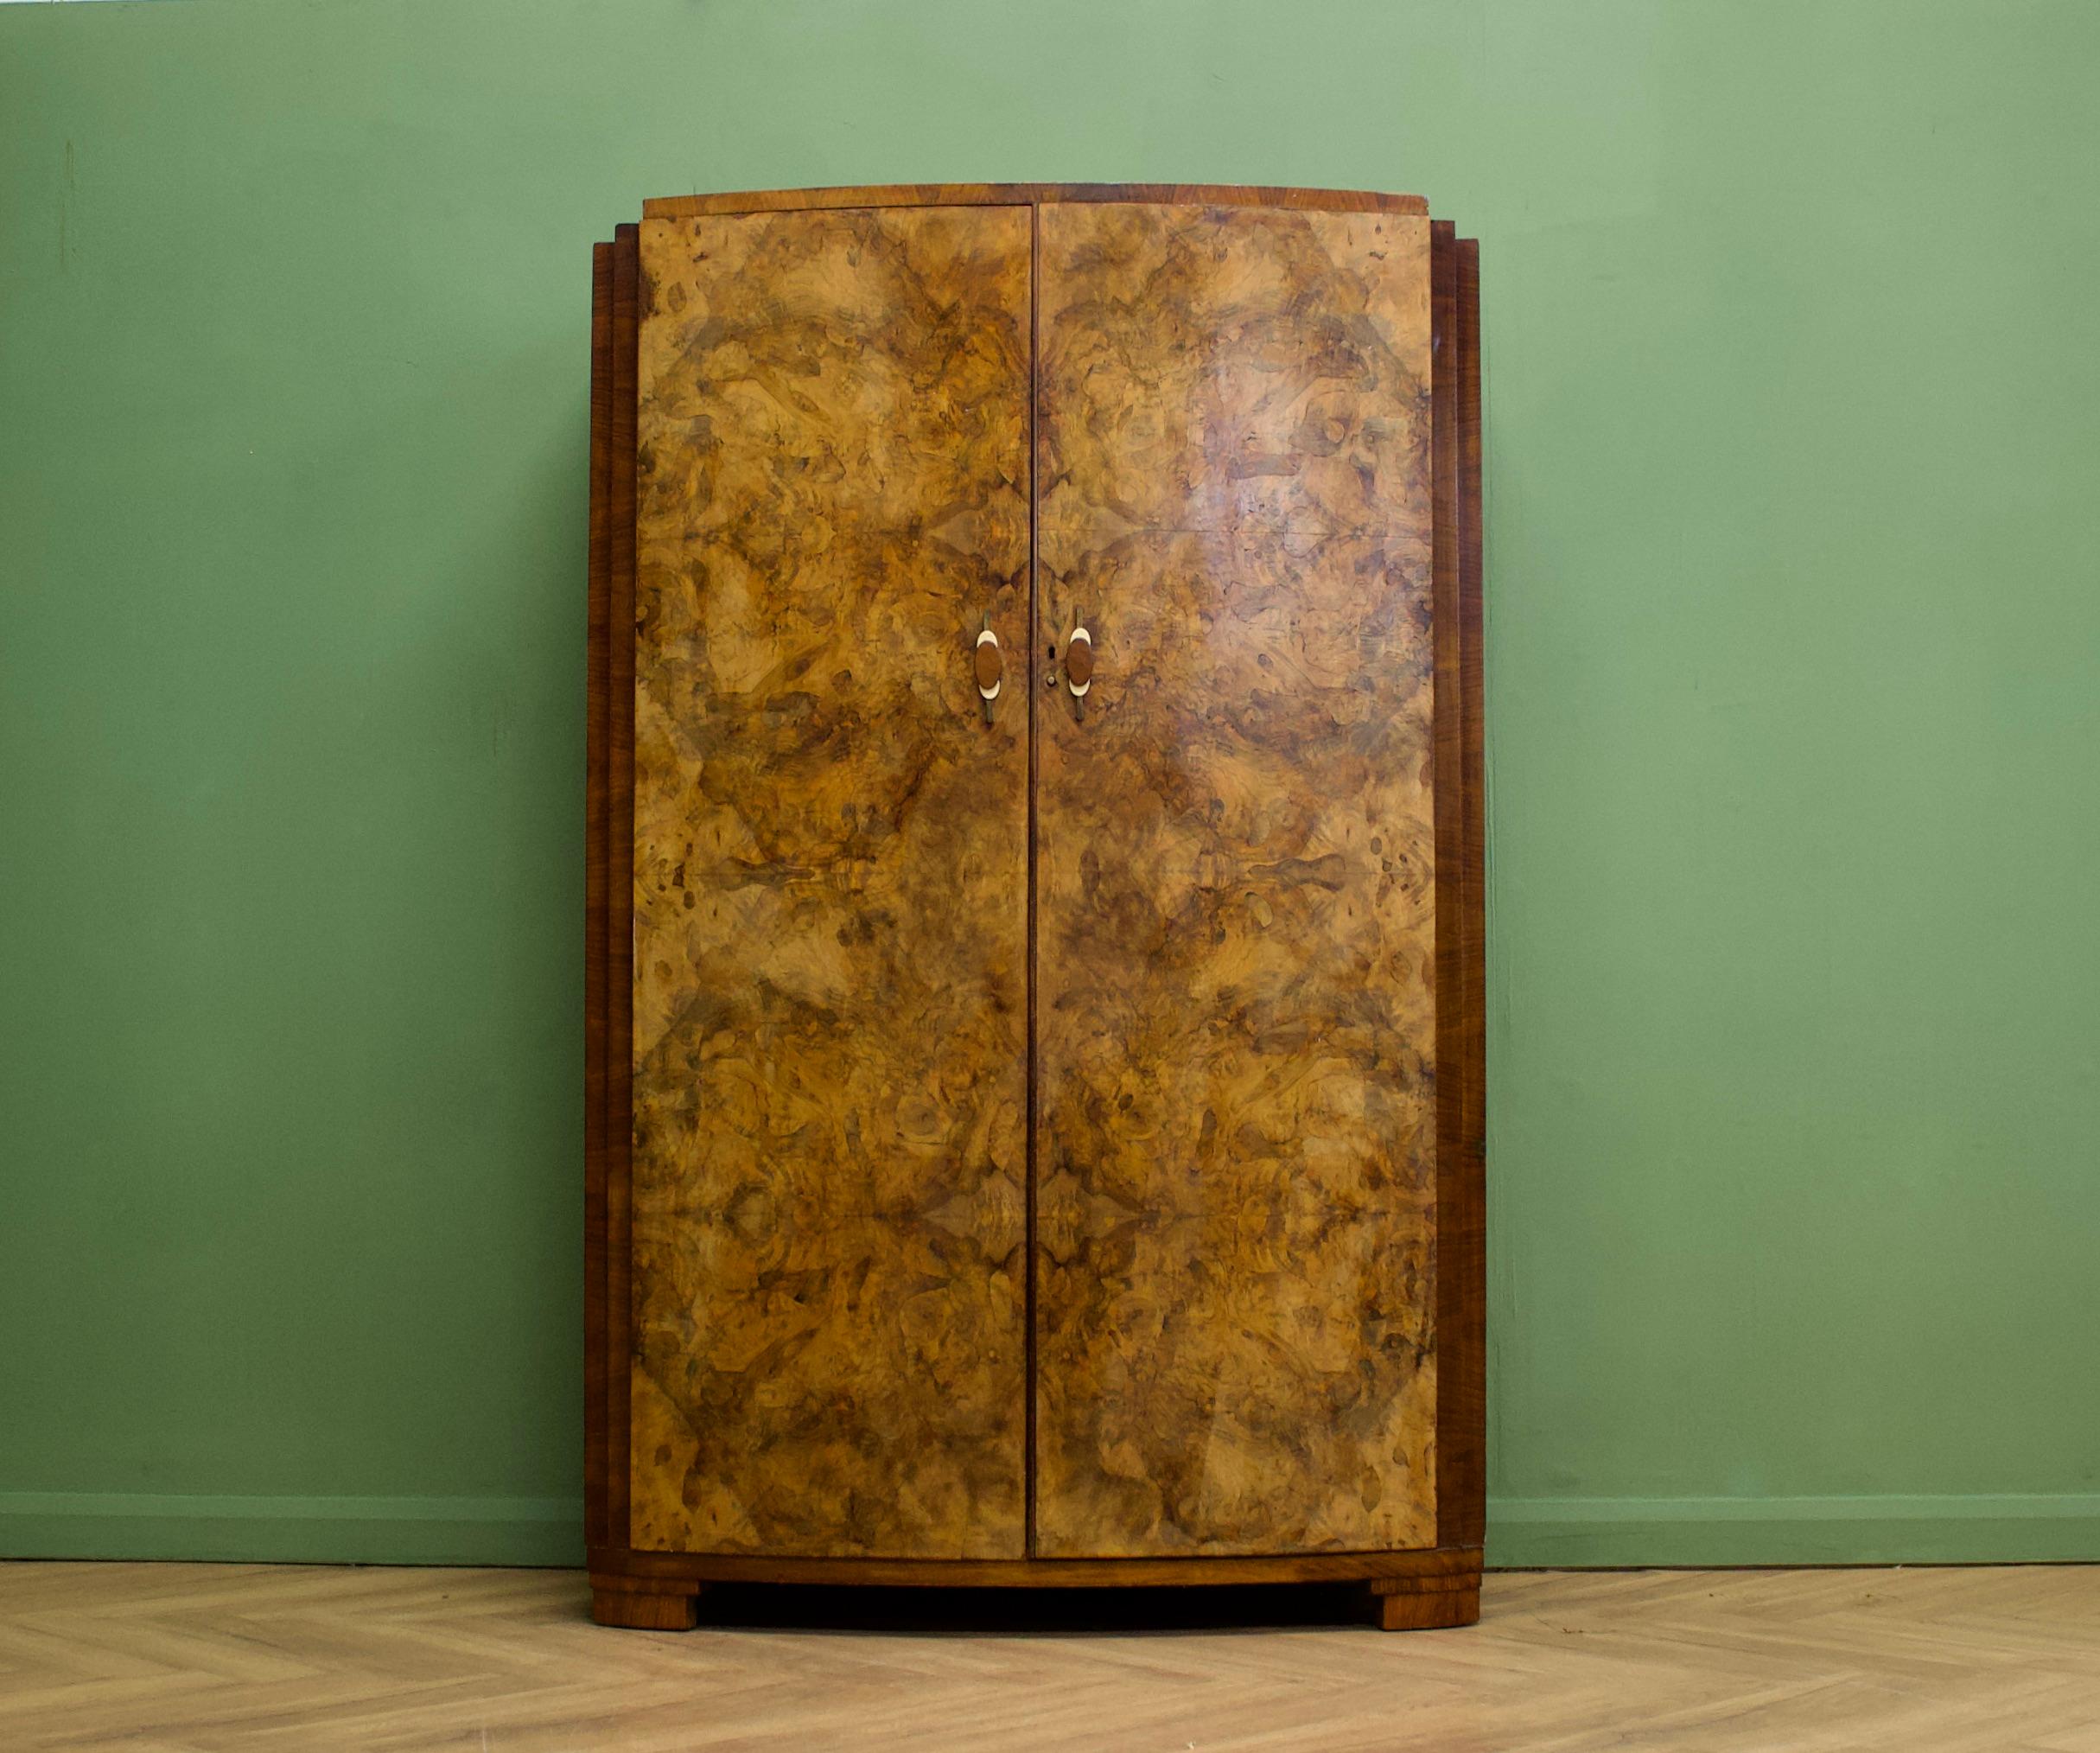 An Art Deco walnut wardrobe
Complete with unique metal, bakelite and walnut handles  - circa 1930's
Fitted out with two clothes rails and a shelf